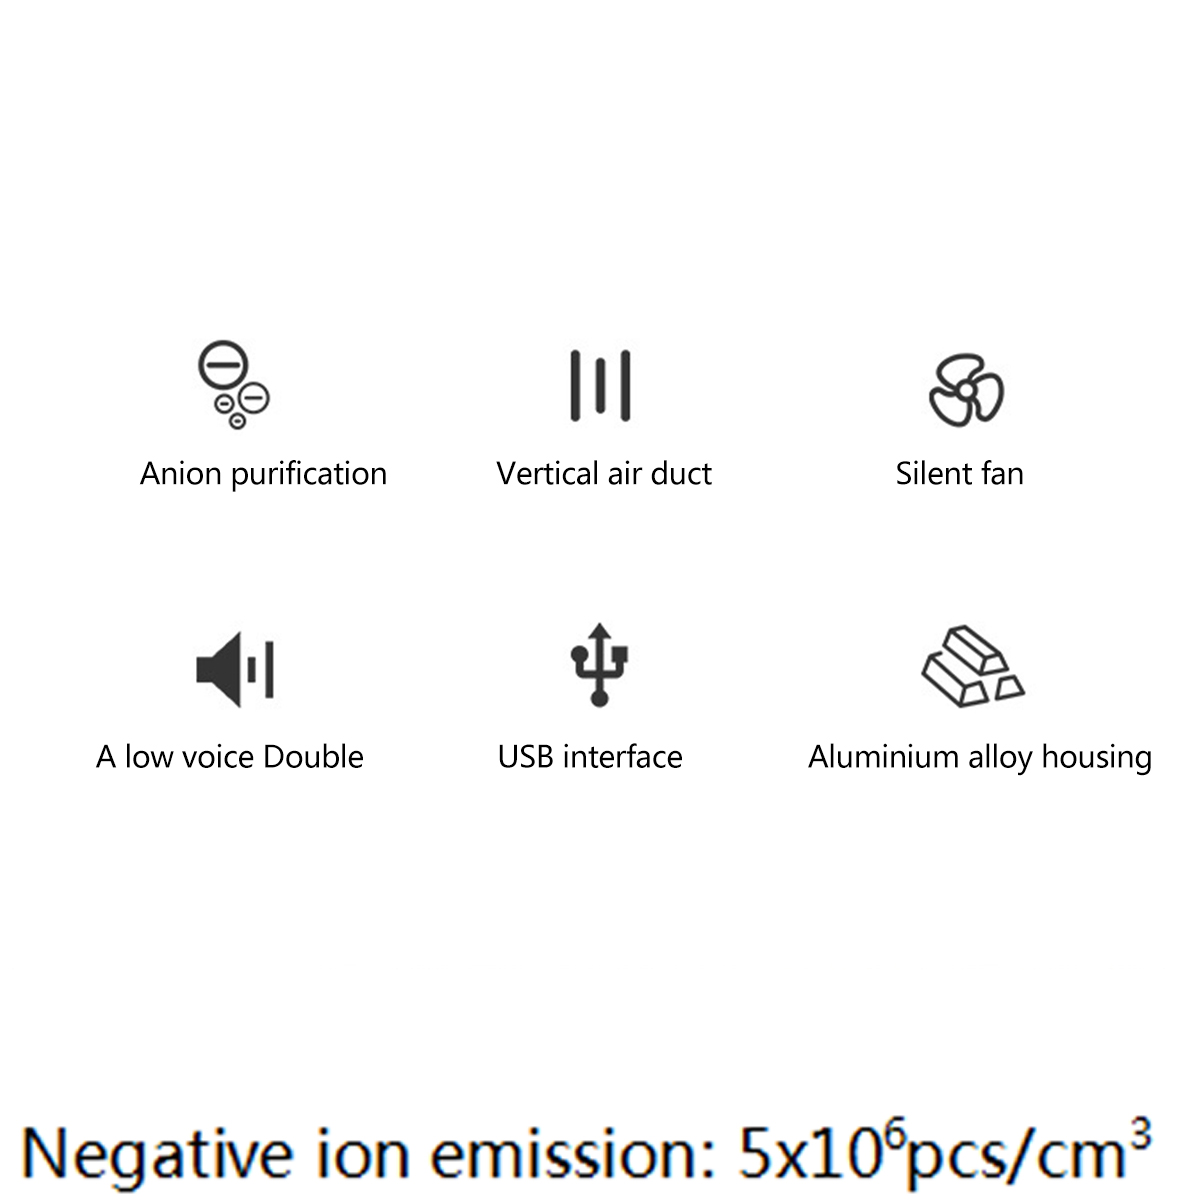 5V-Negative-Ion-Car-Air-Purifier-Car-Demister-USB-Charging-Removal-of-Formaldehyde-PM25-for-Home-Off-1774187-2